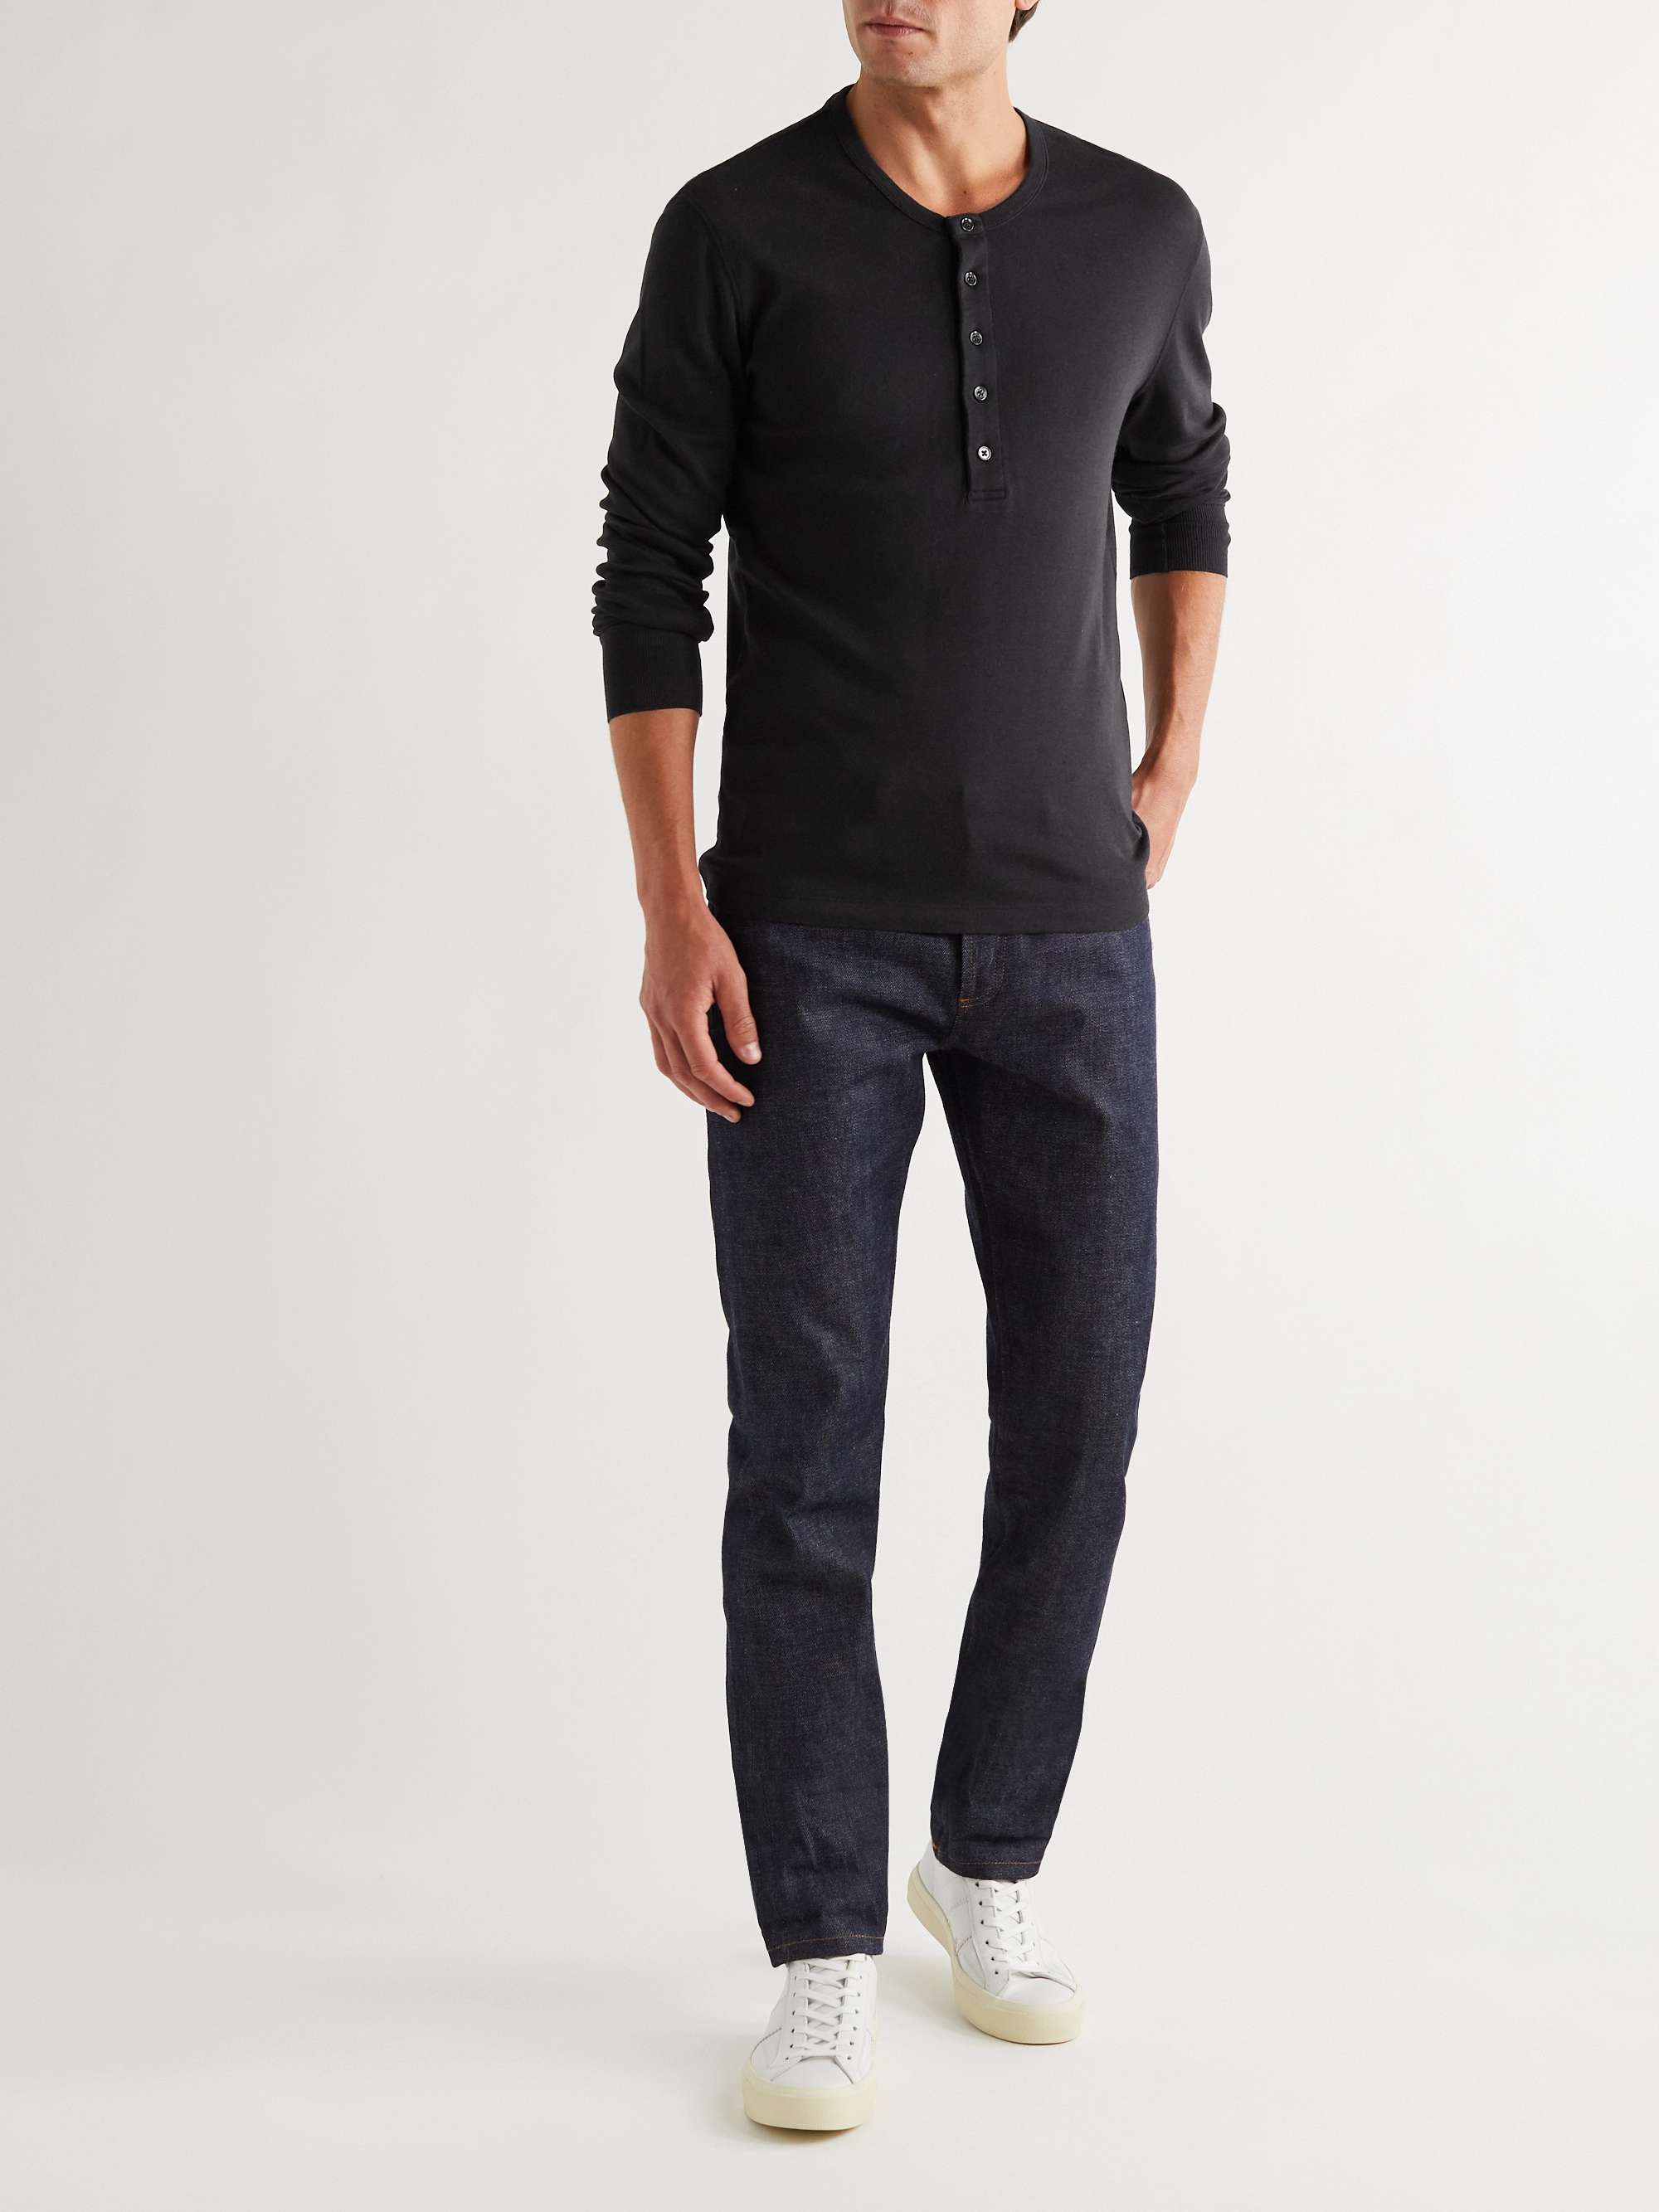 TOM FORD Slim-Fit Cotton and Modal-Blend Jersey Henley T-Shirt